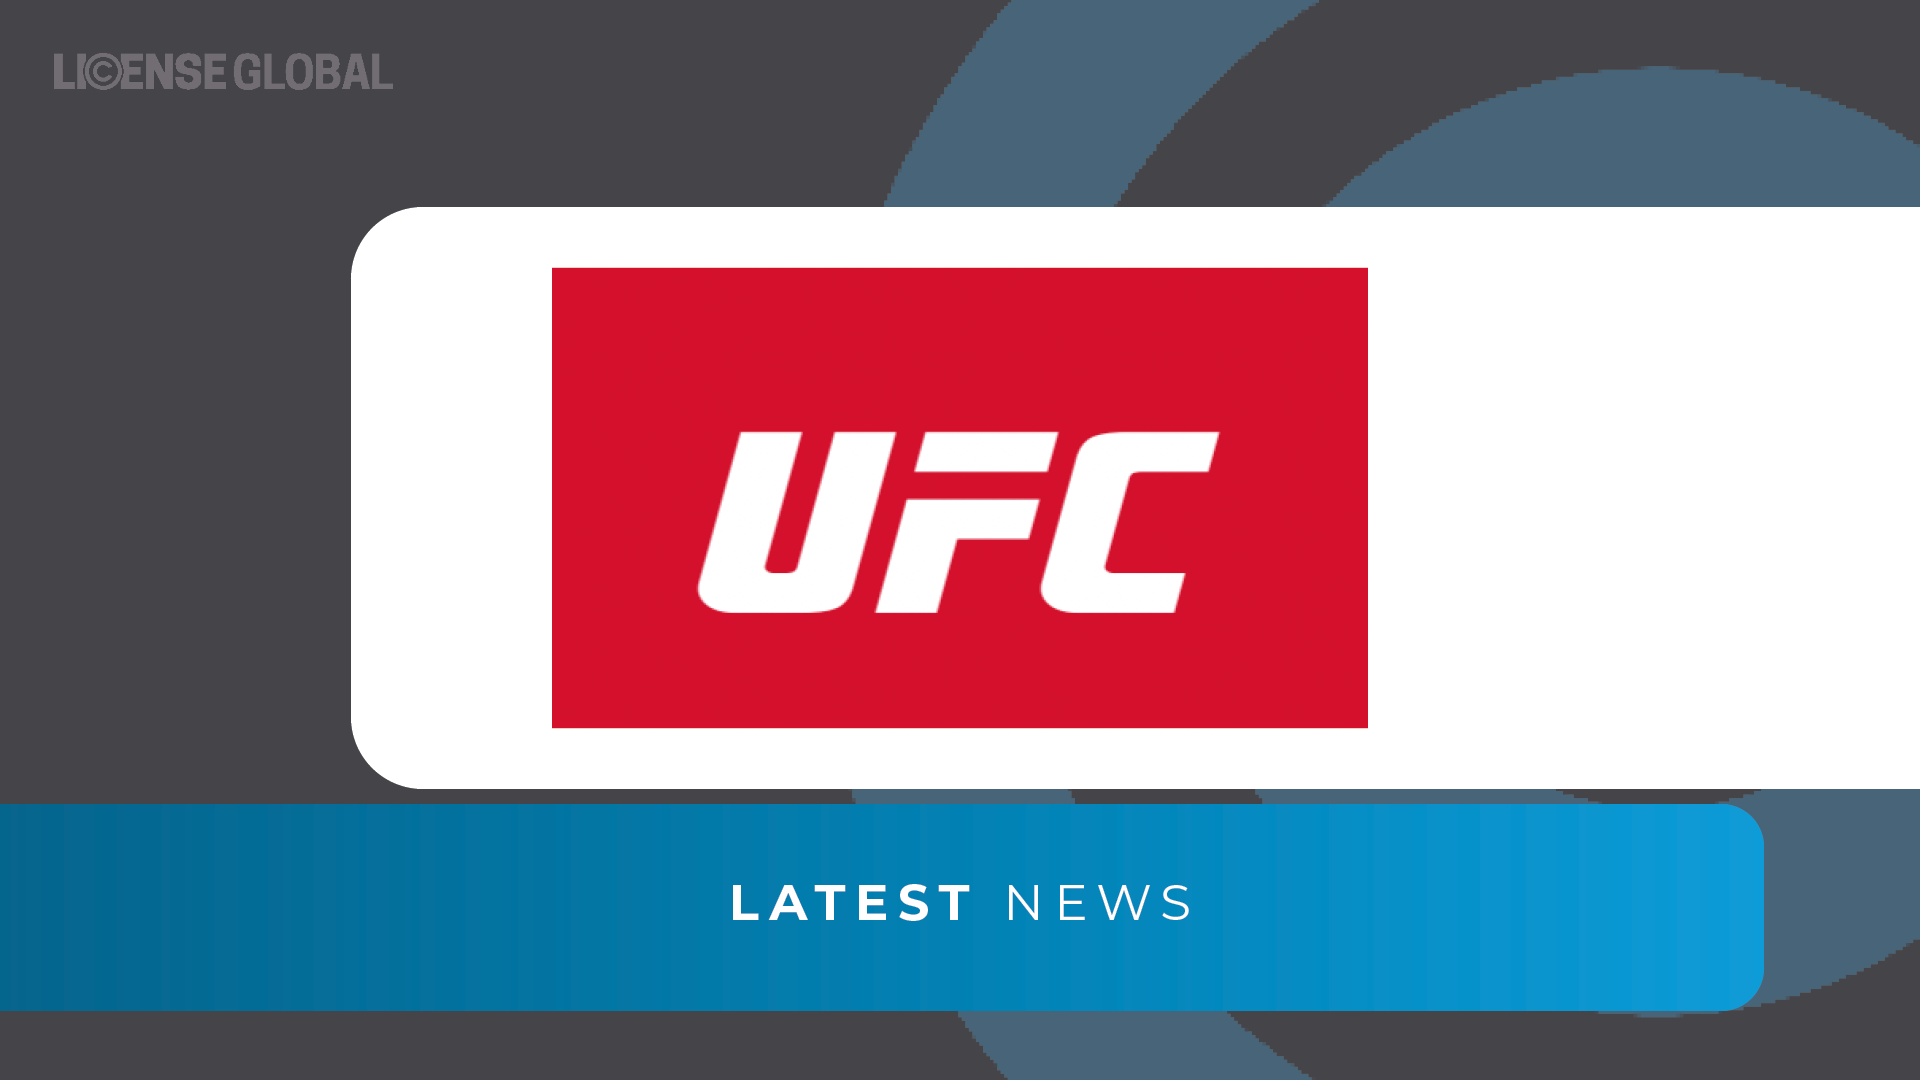 UFC Celebrates 30th Anniversary with Licensing License Global